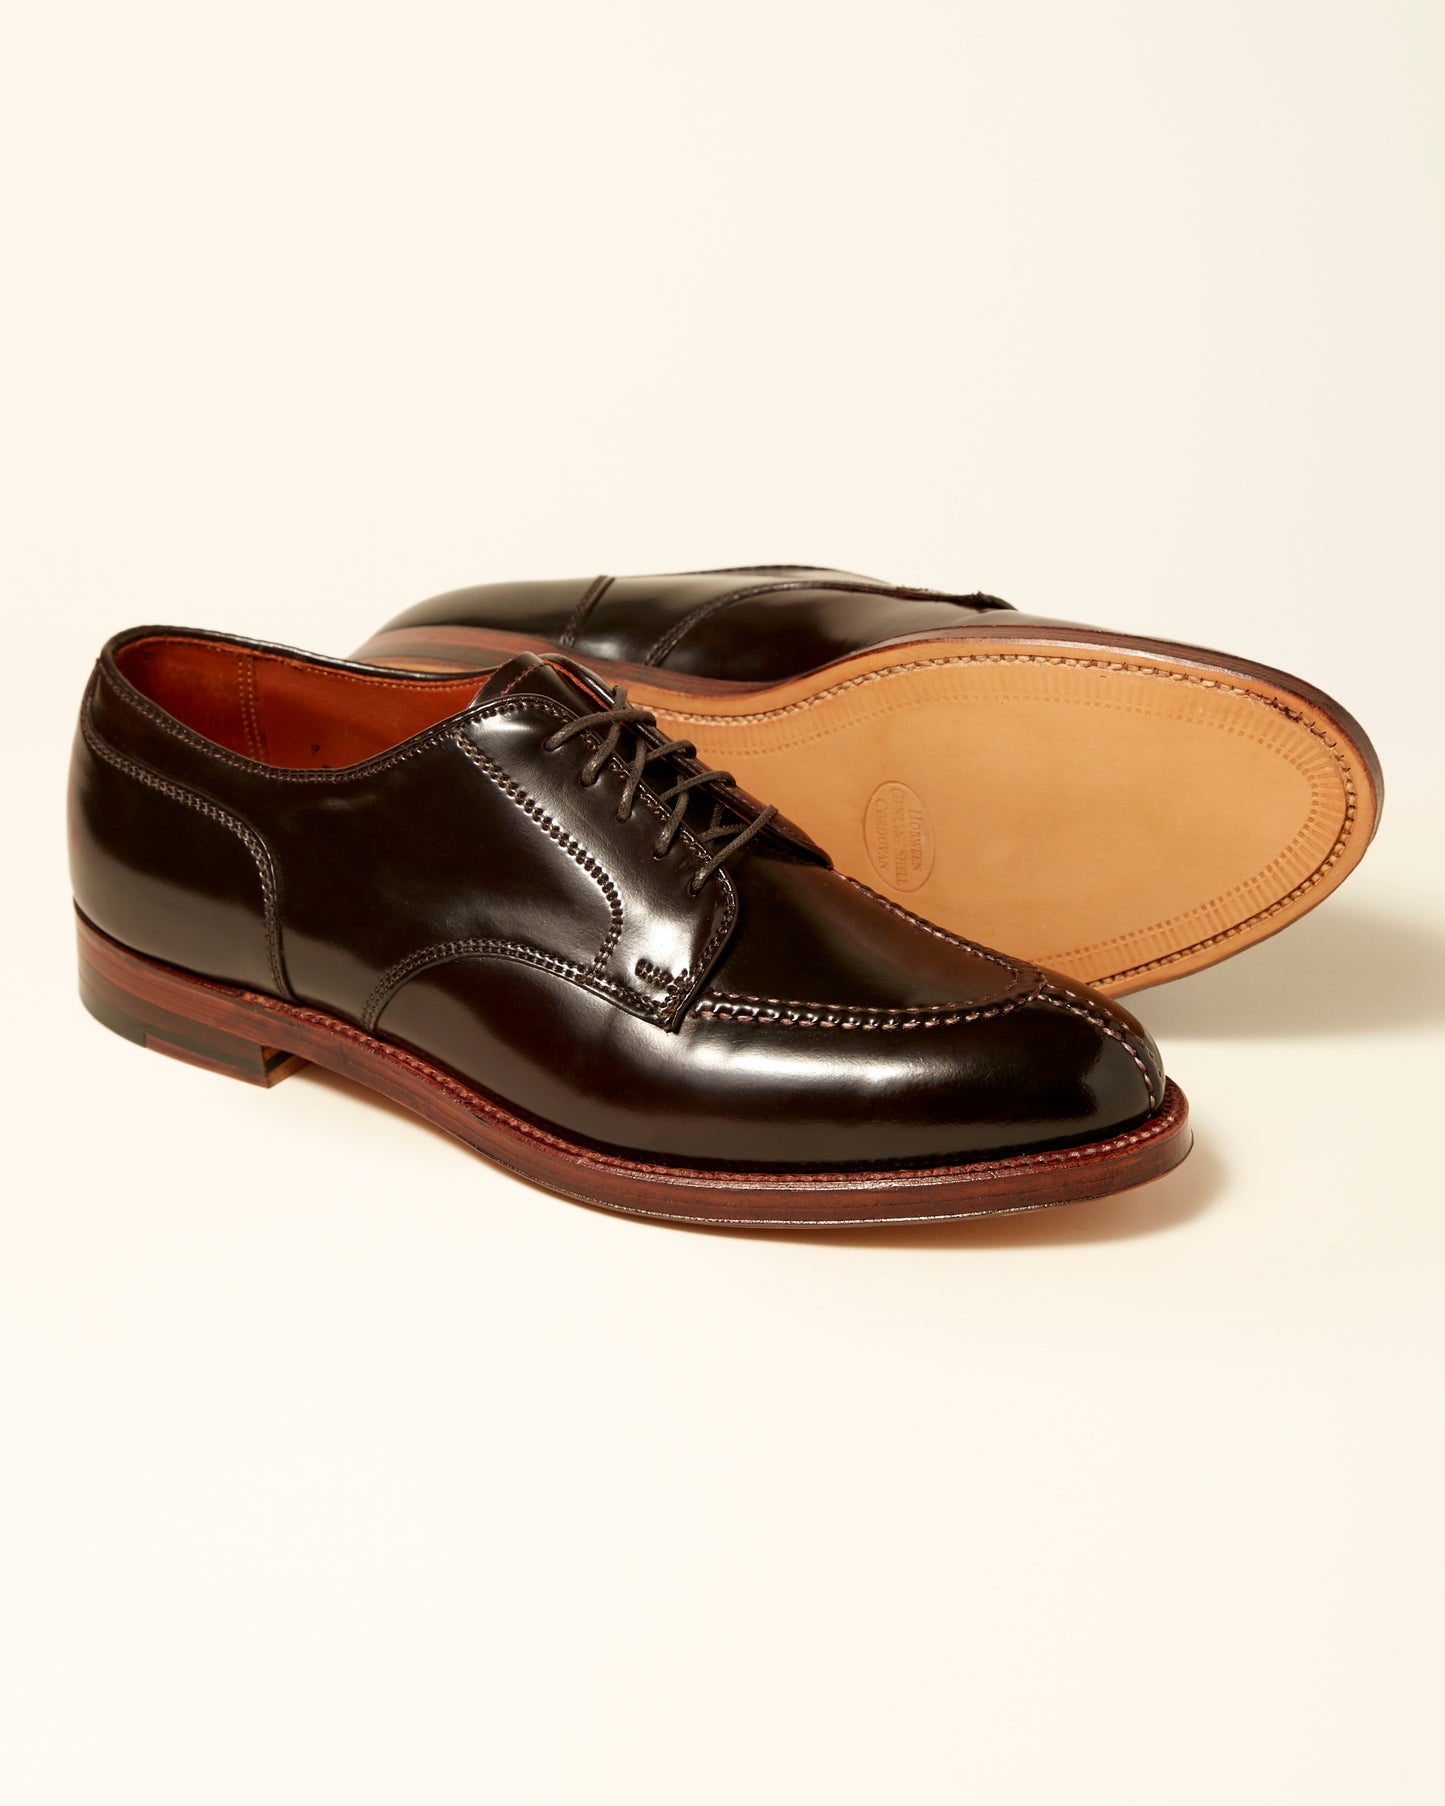 2210A Handsewn Norwegian Front Blucher in Color 8 Shell Cordovan, Aberdeen Last